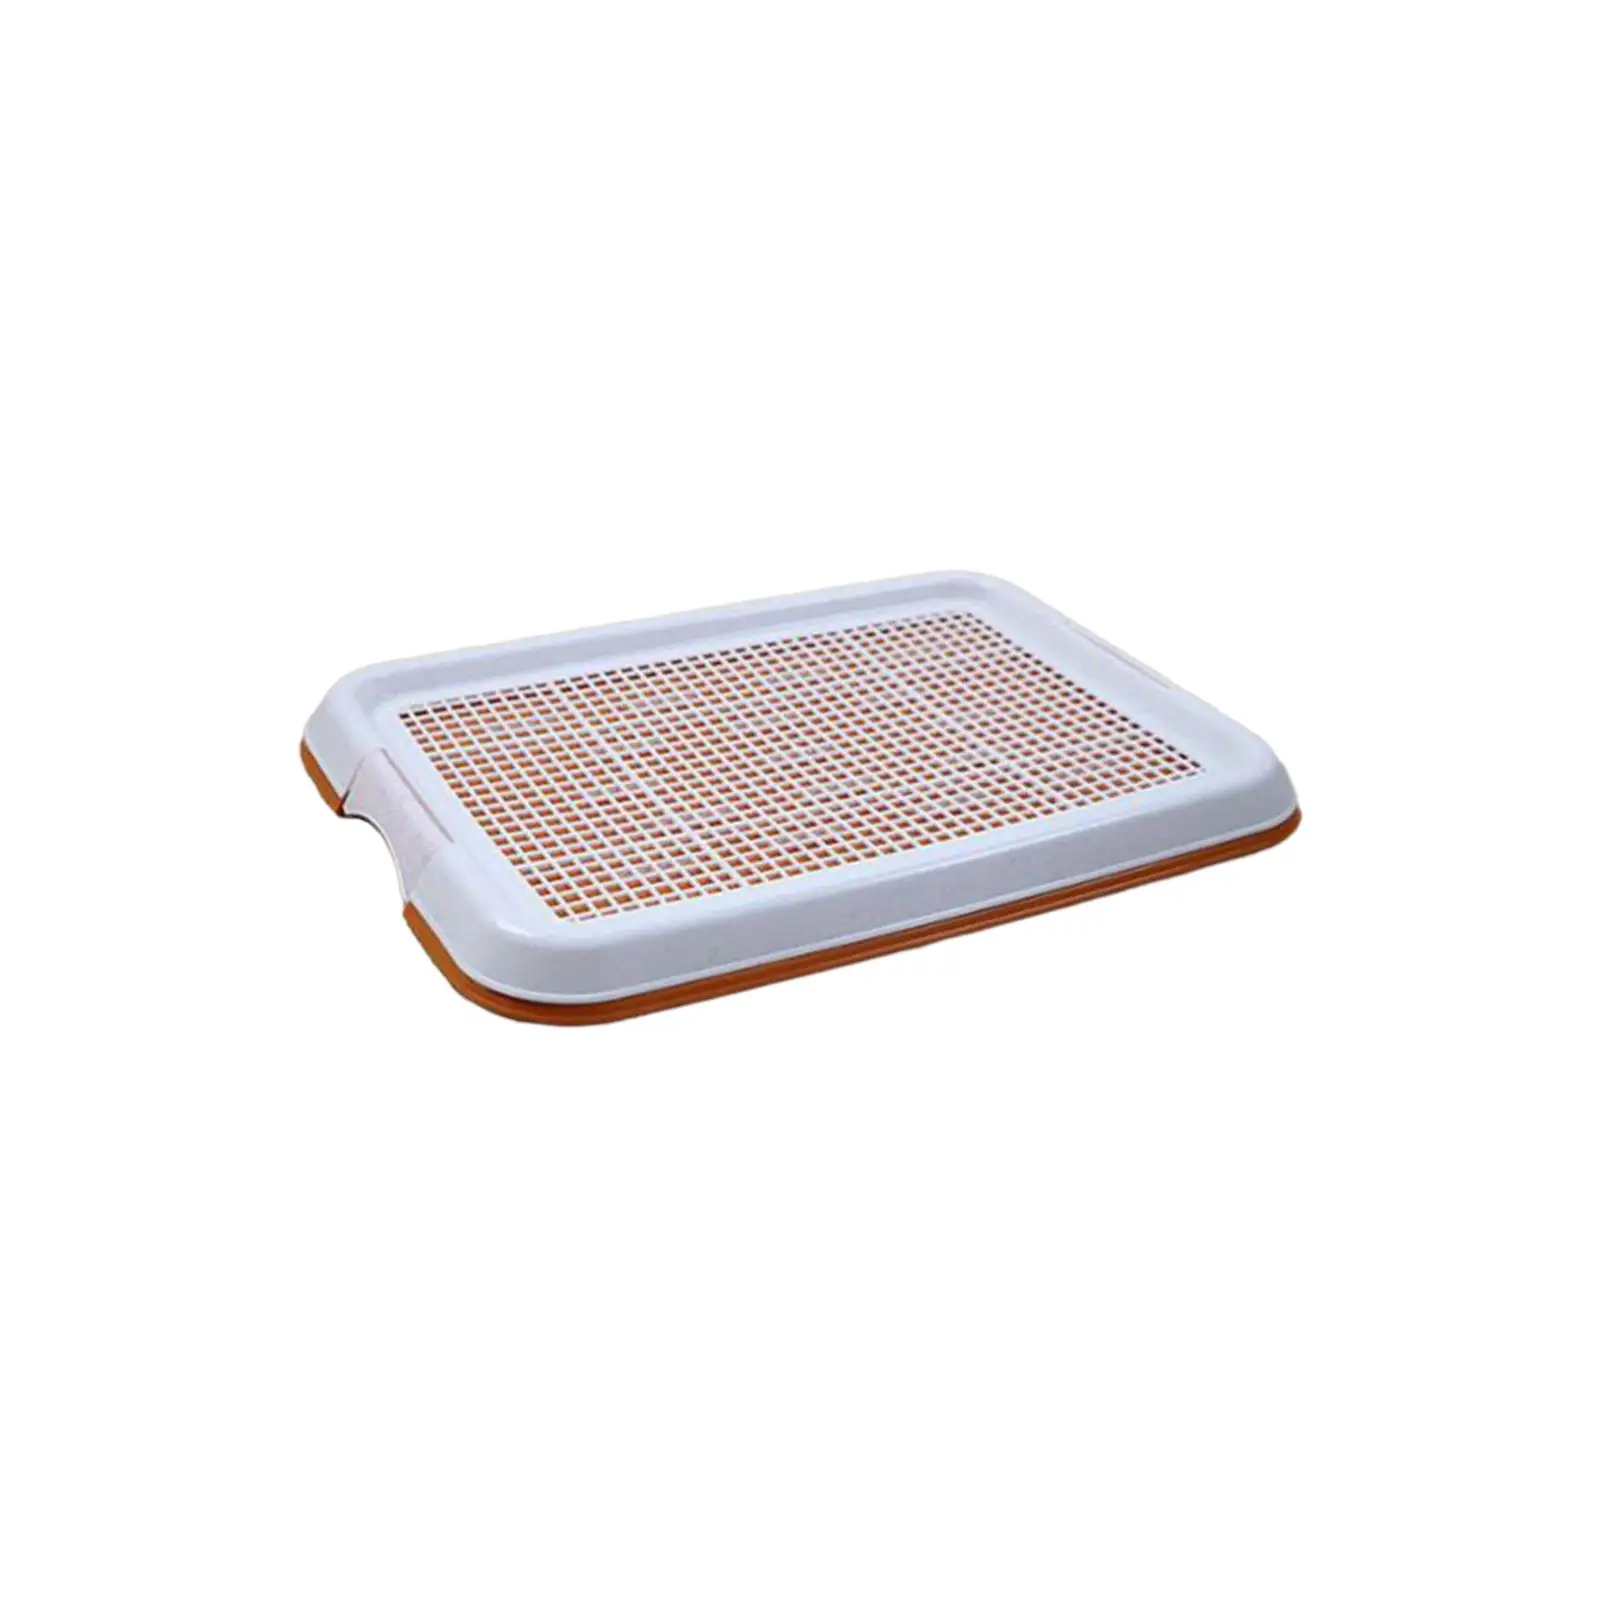 Dog Potty Toilet Removable Mesh Potty Tray for Small Size Dogs